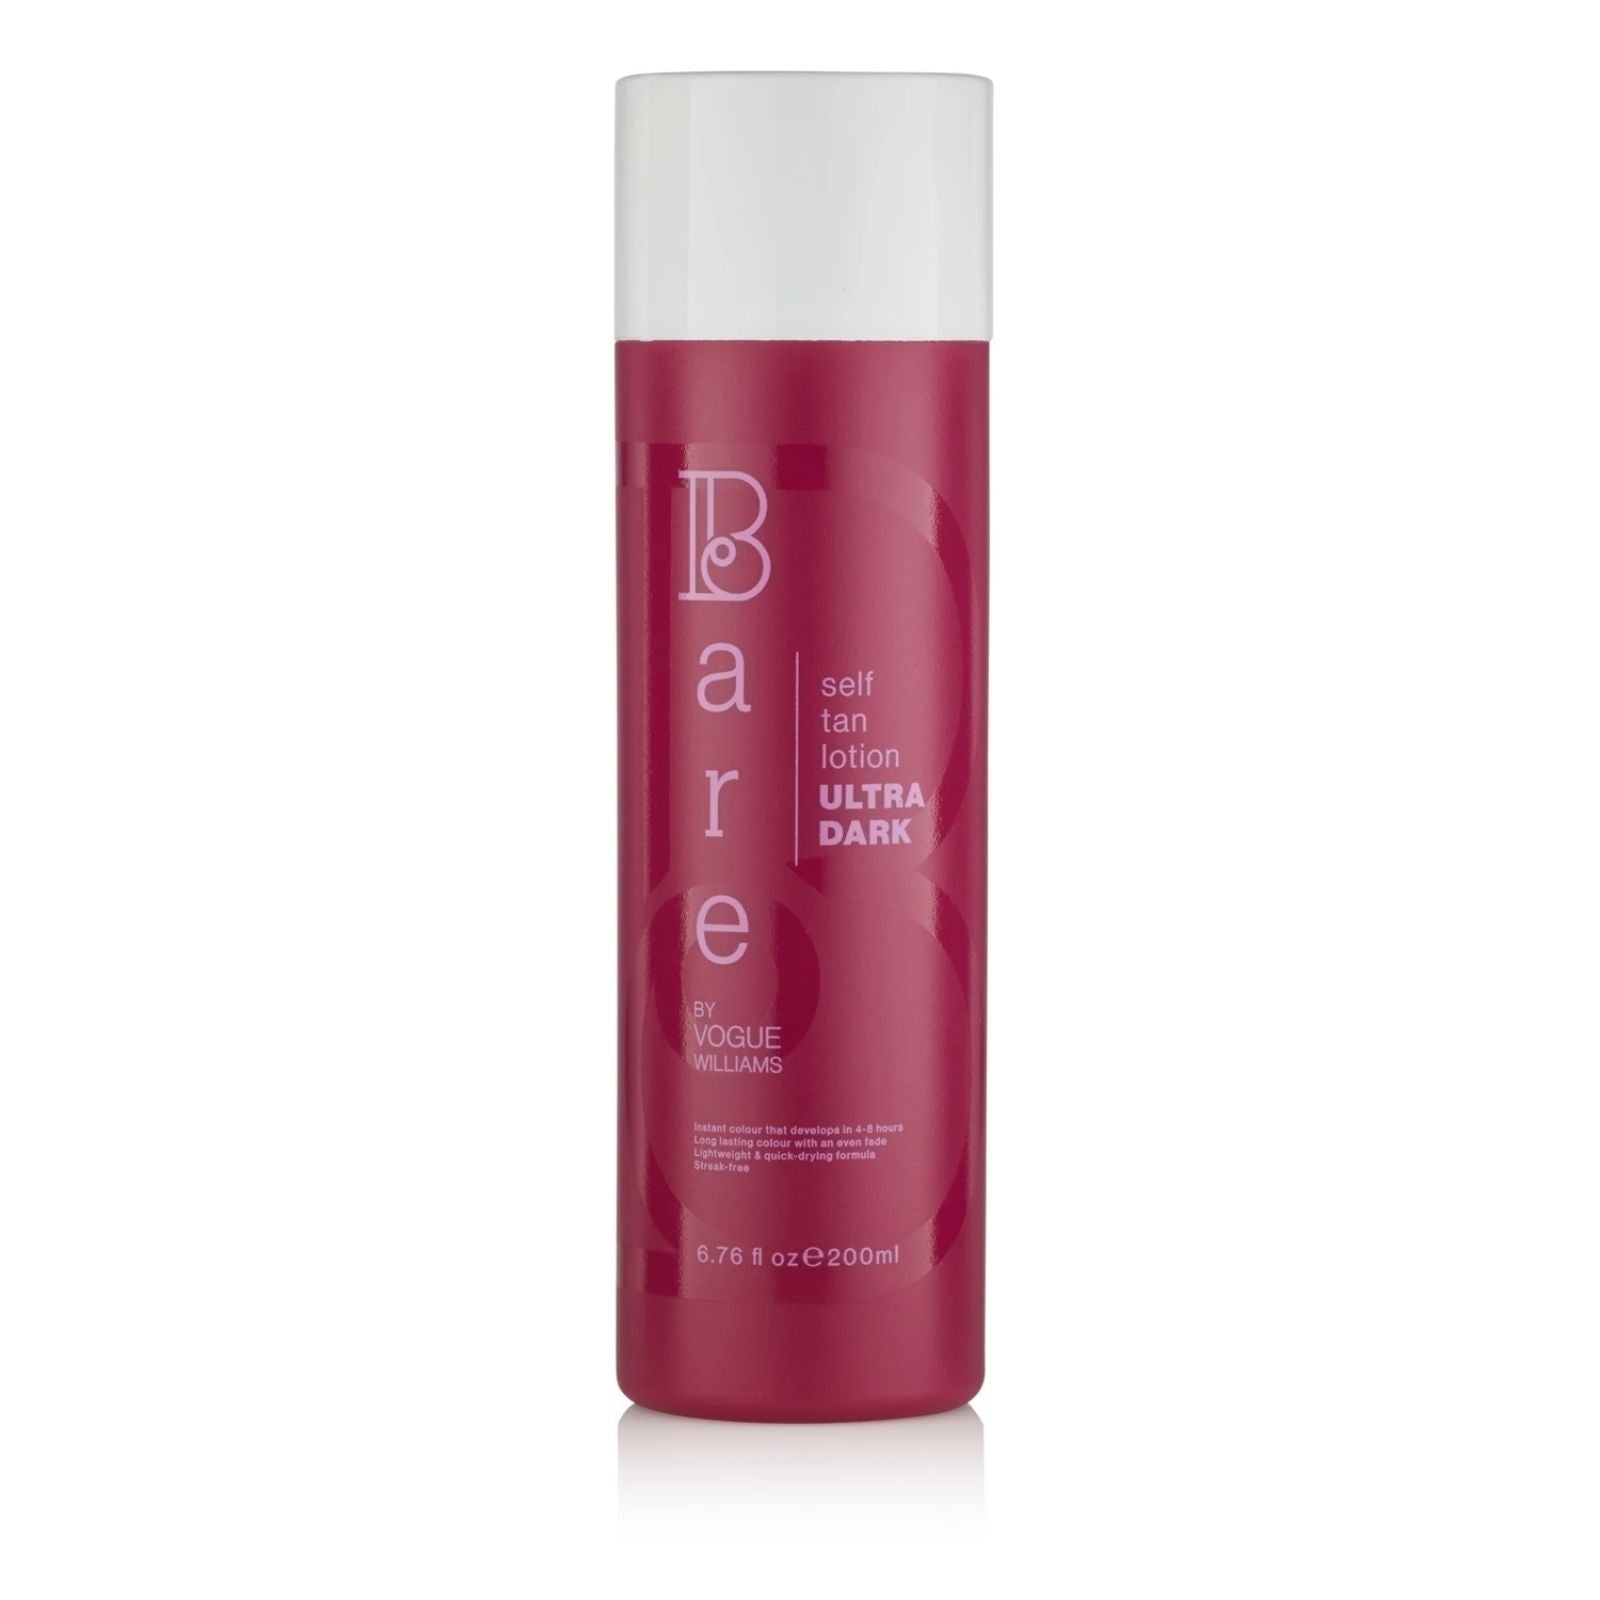 Bare by Vogue Bare by Vogue | Self Tan Lotion Ultra Dark | 200ml - SkinShop